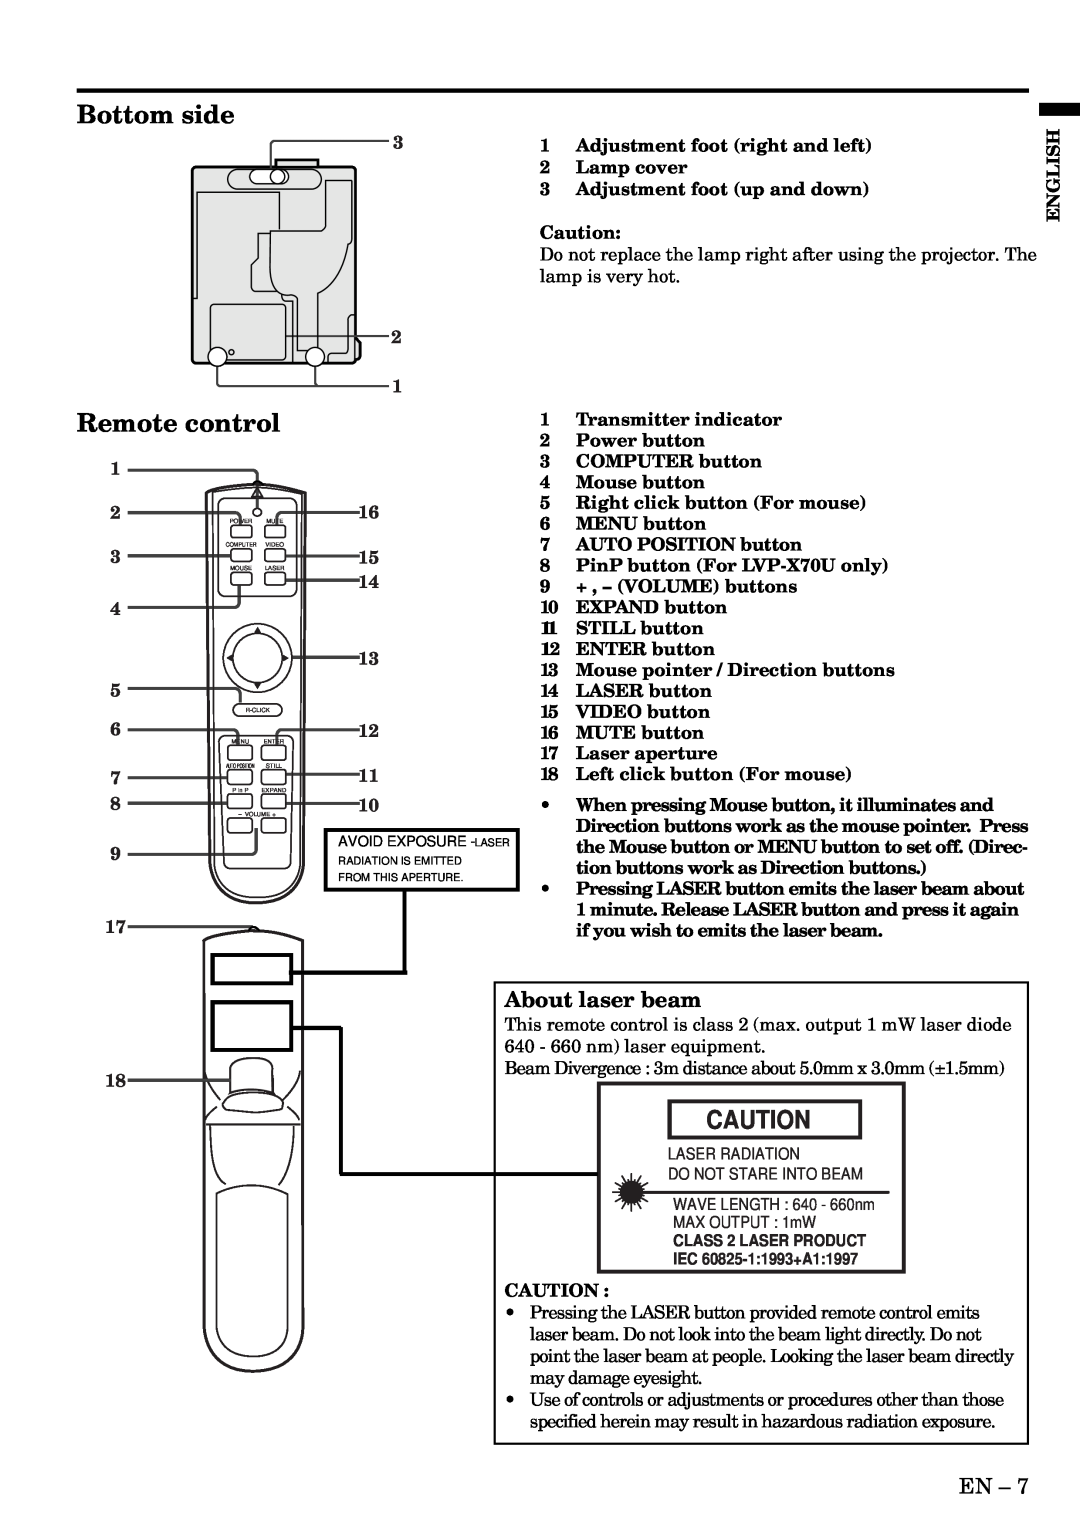 Mitsubishi Electronics X70, X50 user manual Bottom side, Remote control, About laser beam 